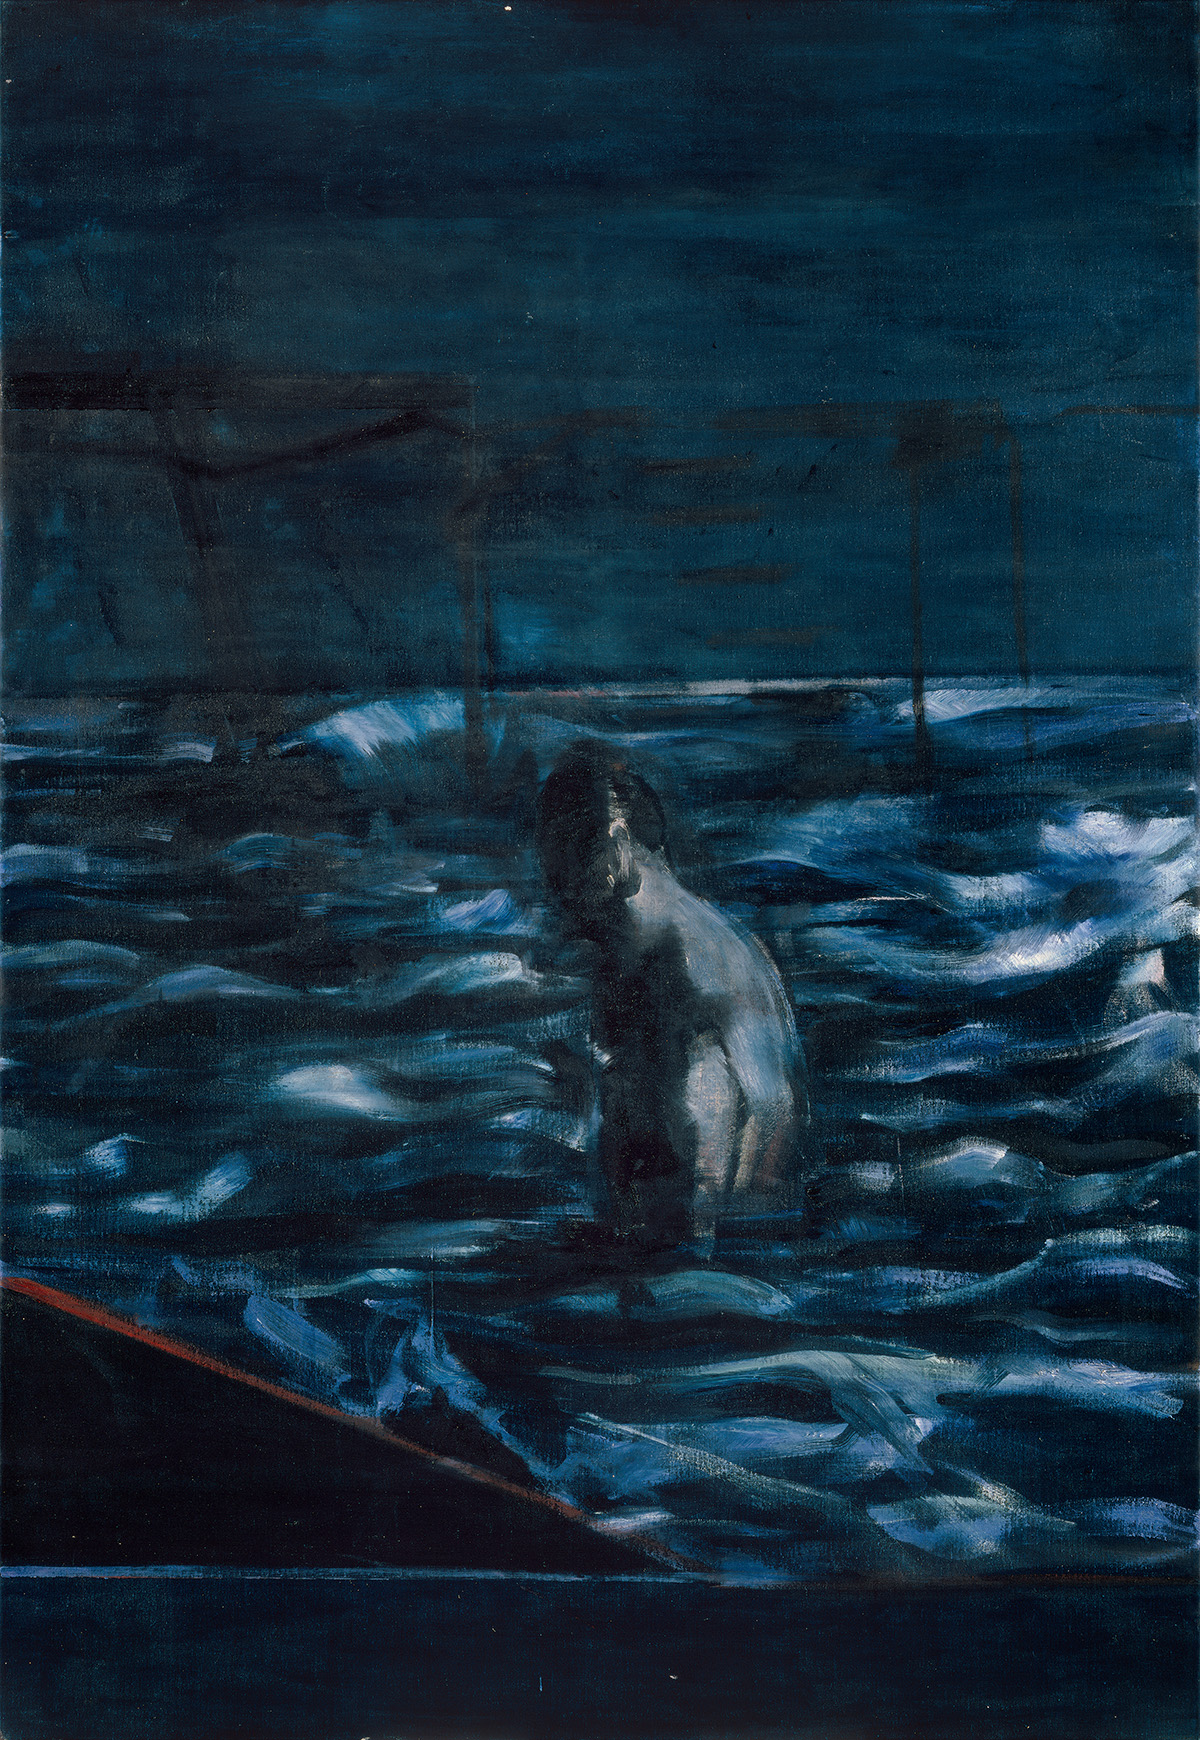 Francis Bacon, ‘Figure in Sea’, c.1957. Oil on canvas. CR number 57-24. © The Estate of Francis Bacon / DACS London 2020. All rights reserved.